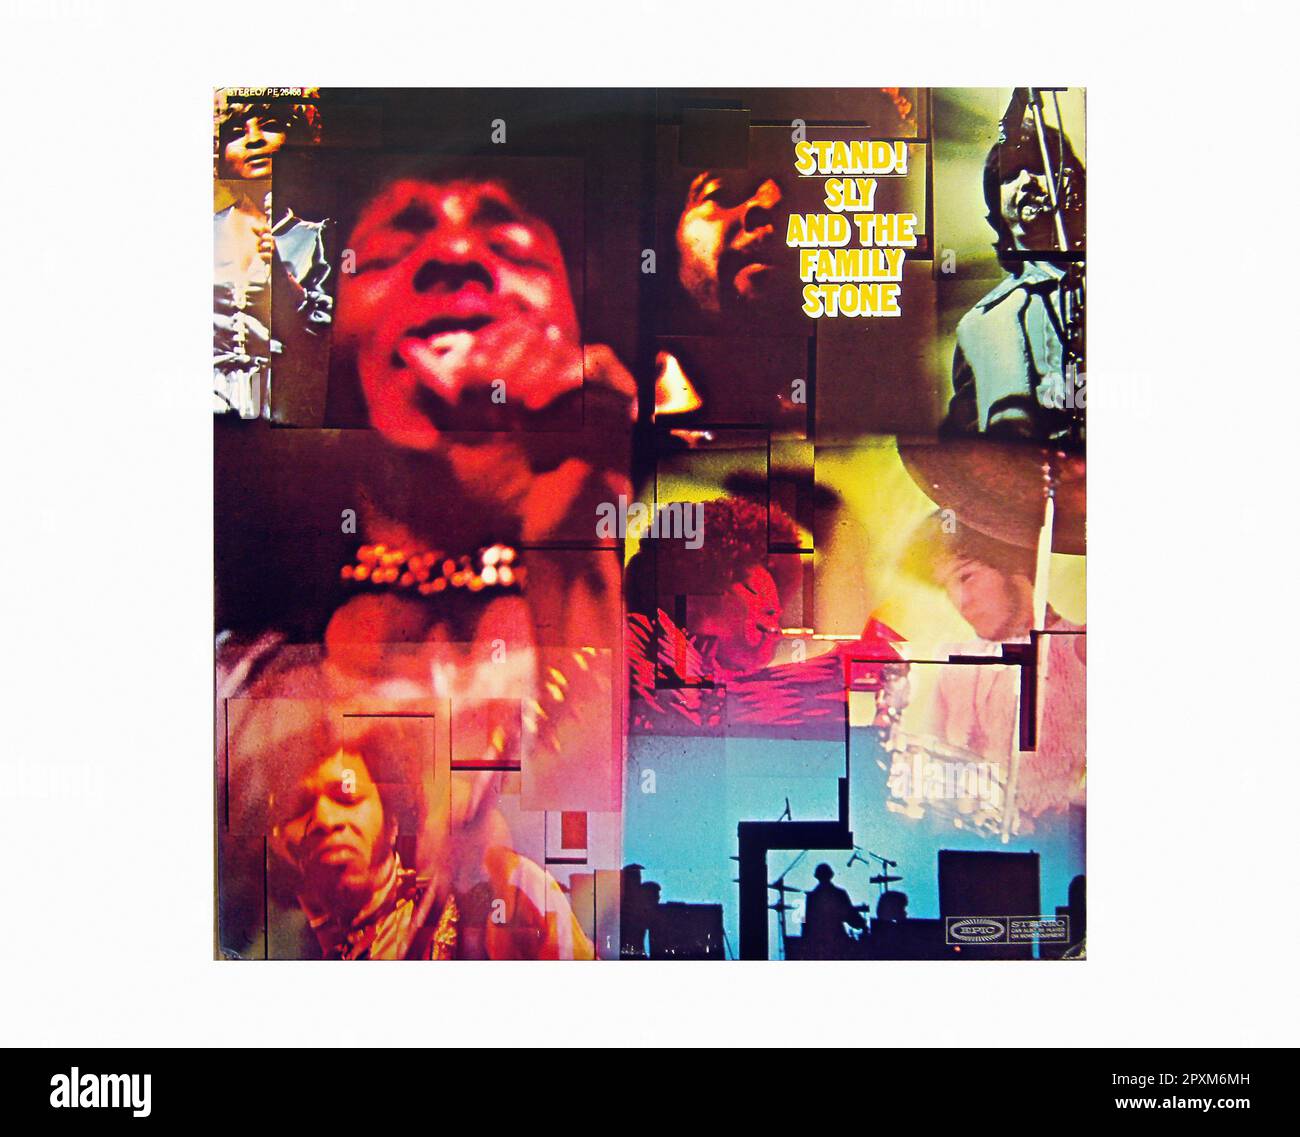 Sly & The Family Stone - Stand! [1969] - Vintage Vinyl Record Sleeve Stock Photo